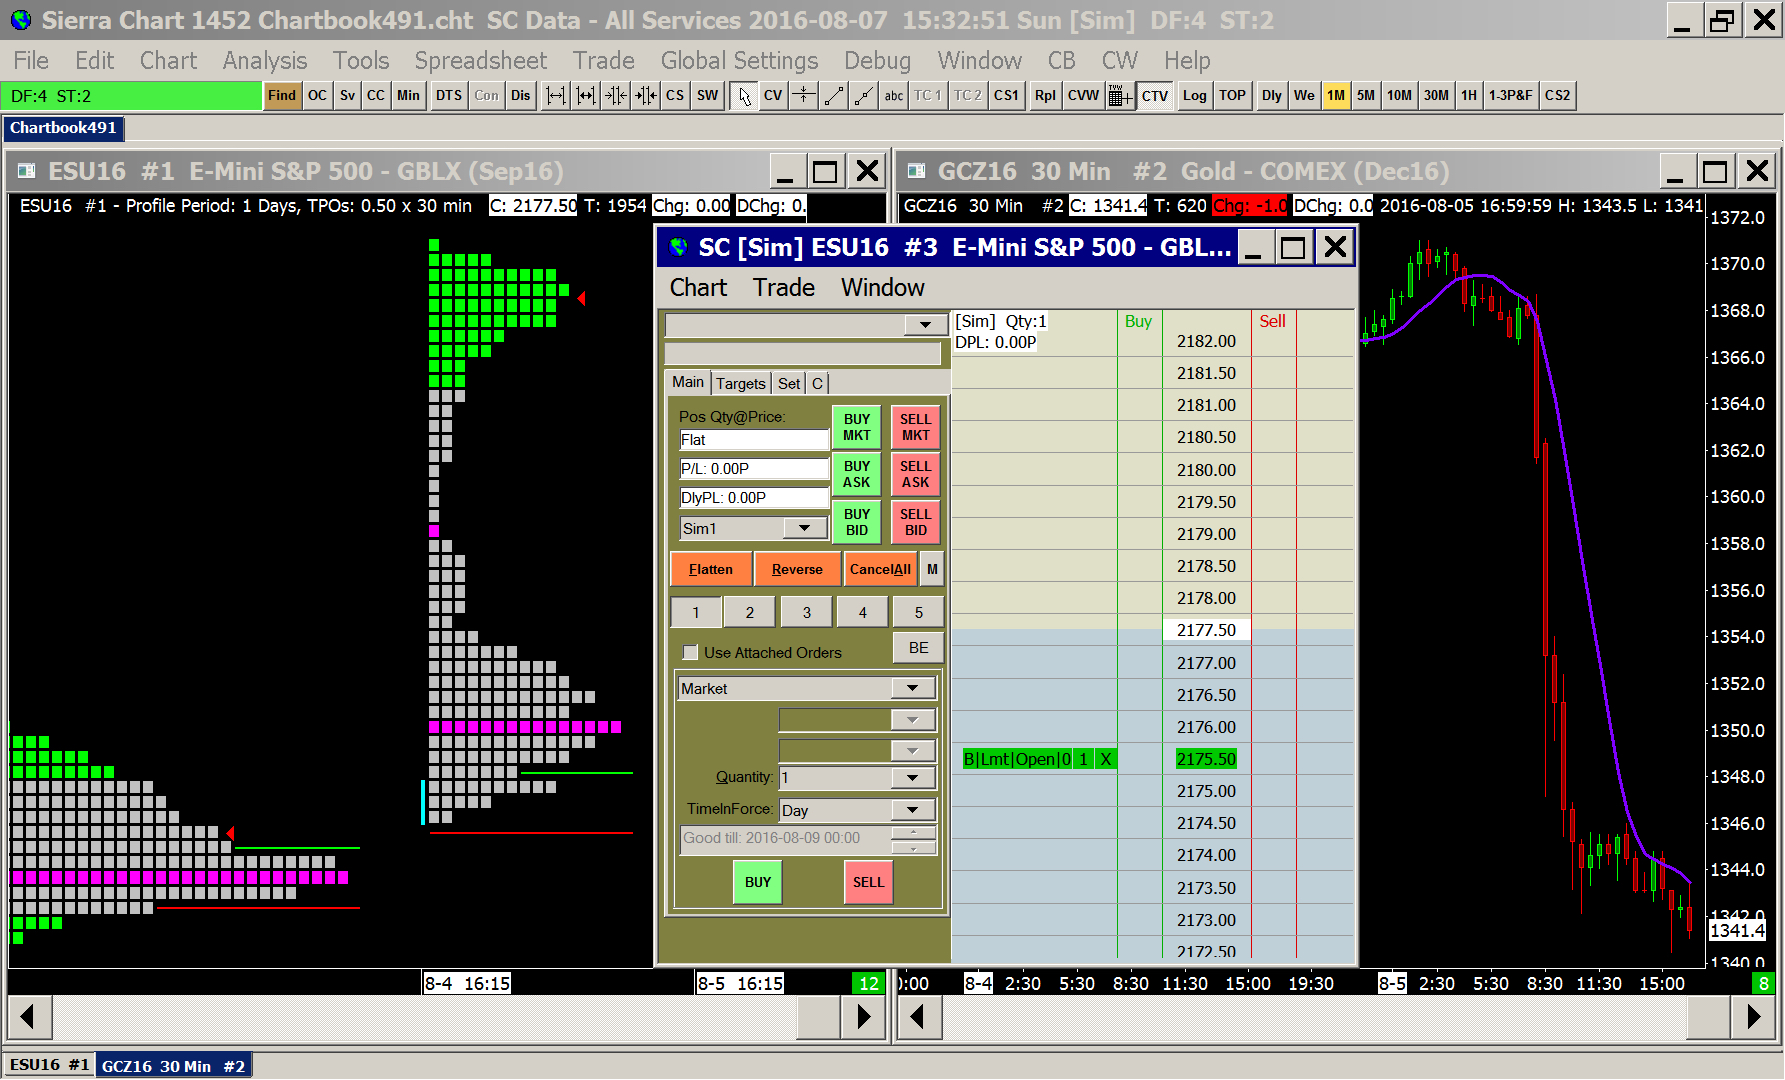 Futures Trading Software Advantage Futures Futures Brokers Futures and Options Commodities